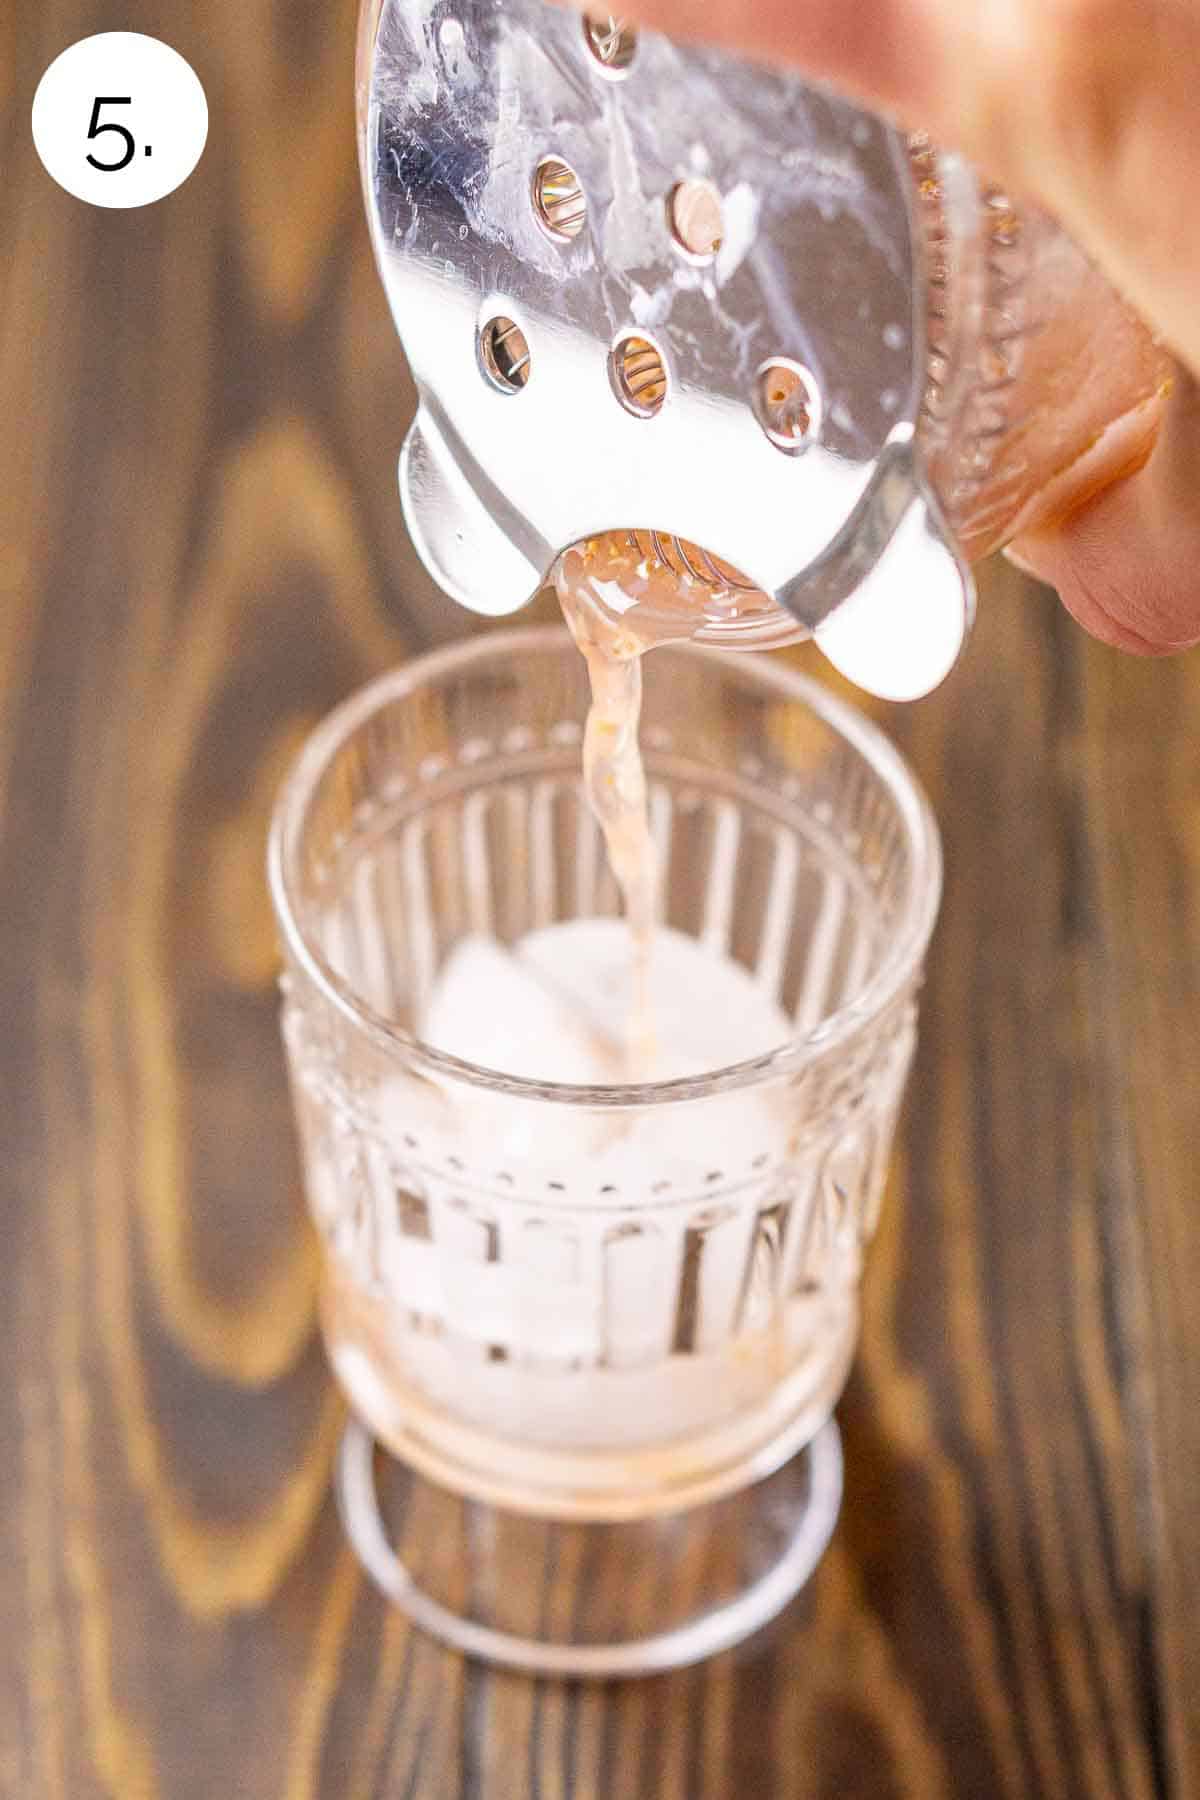 Using a Hawthorne strainer to pour the drink into a glass with ice.